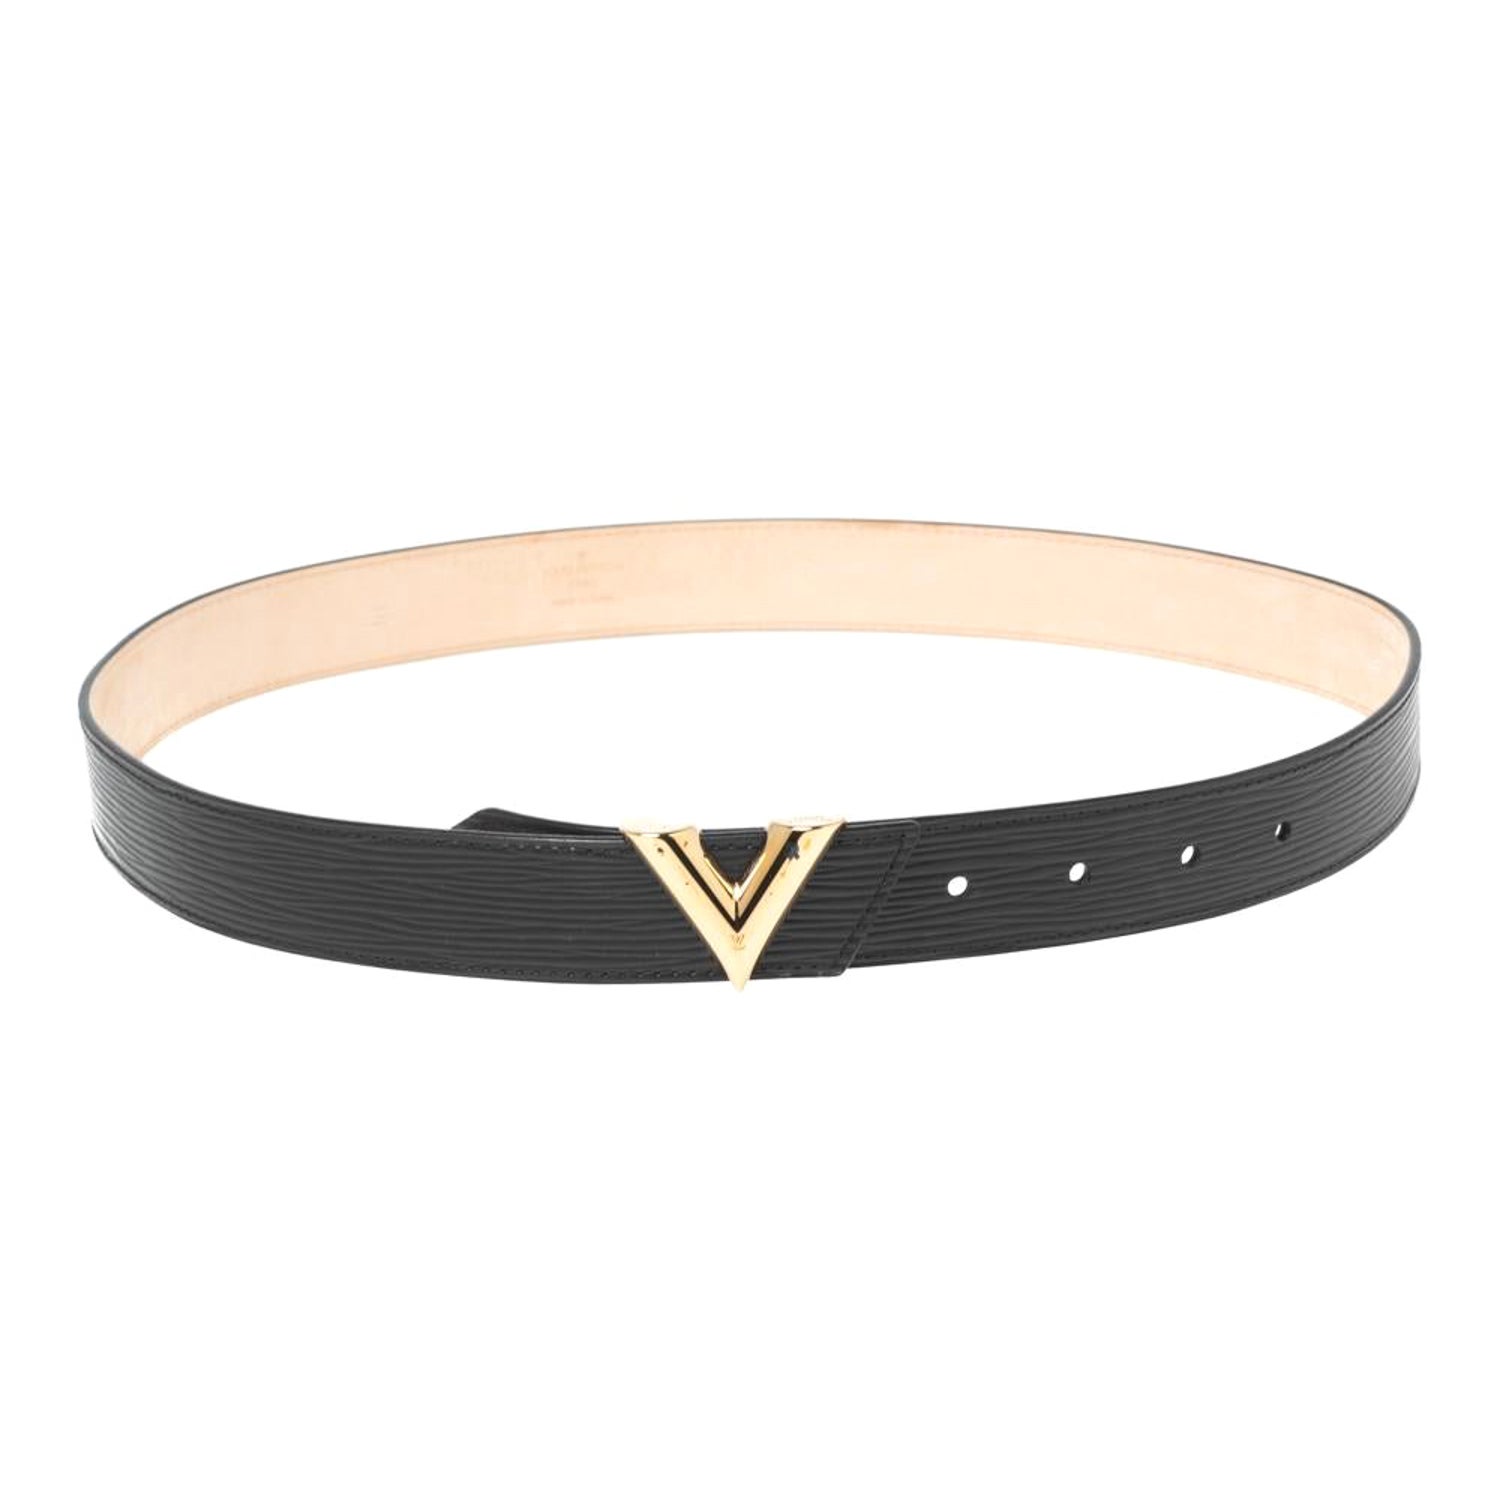 Louis Vuitton Belt White And Black -4 For Sale on 1stDibs